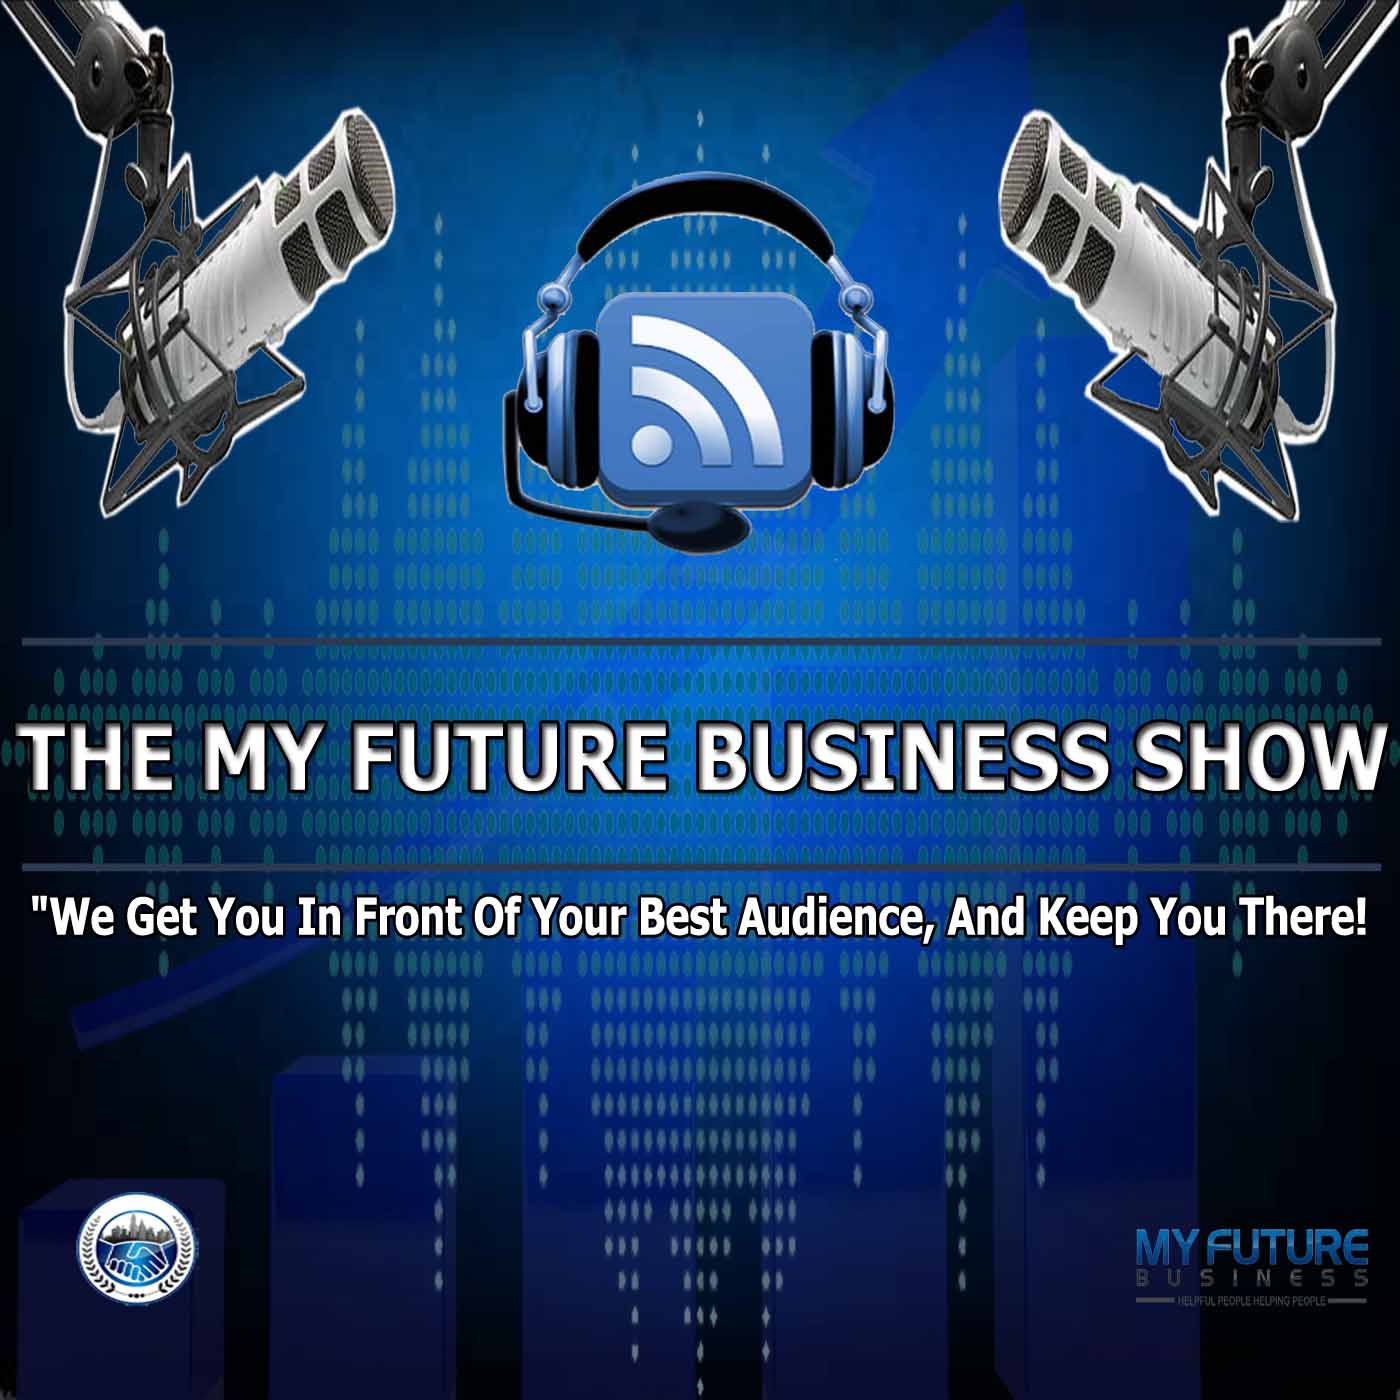 The My Future Business™ Show